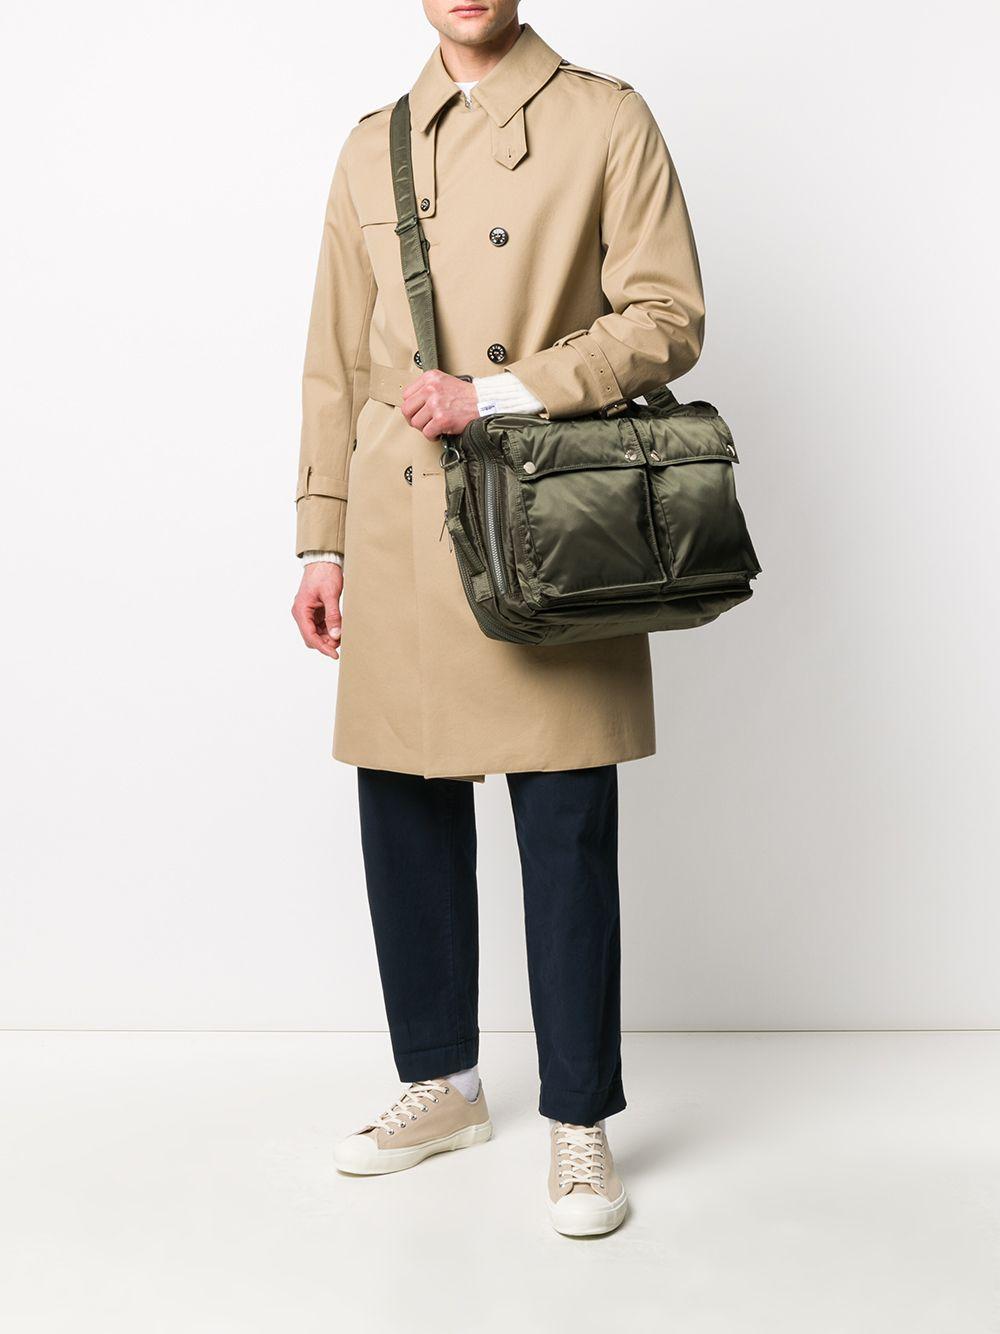 Porter-Yoshida and Co X Porter 3-way Briefcase in Green | Lyst